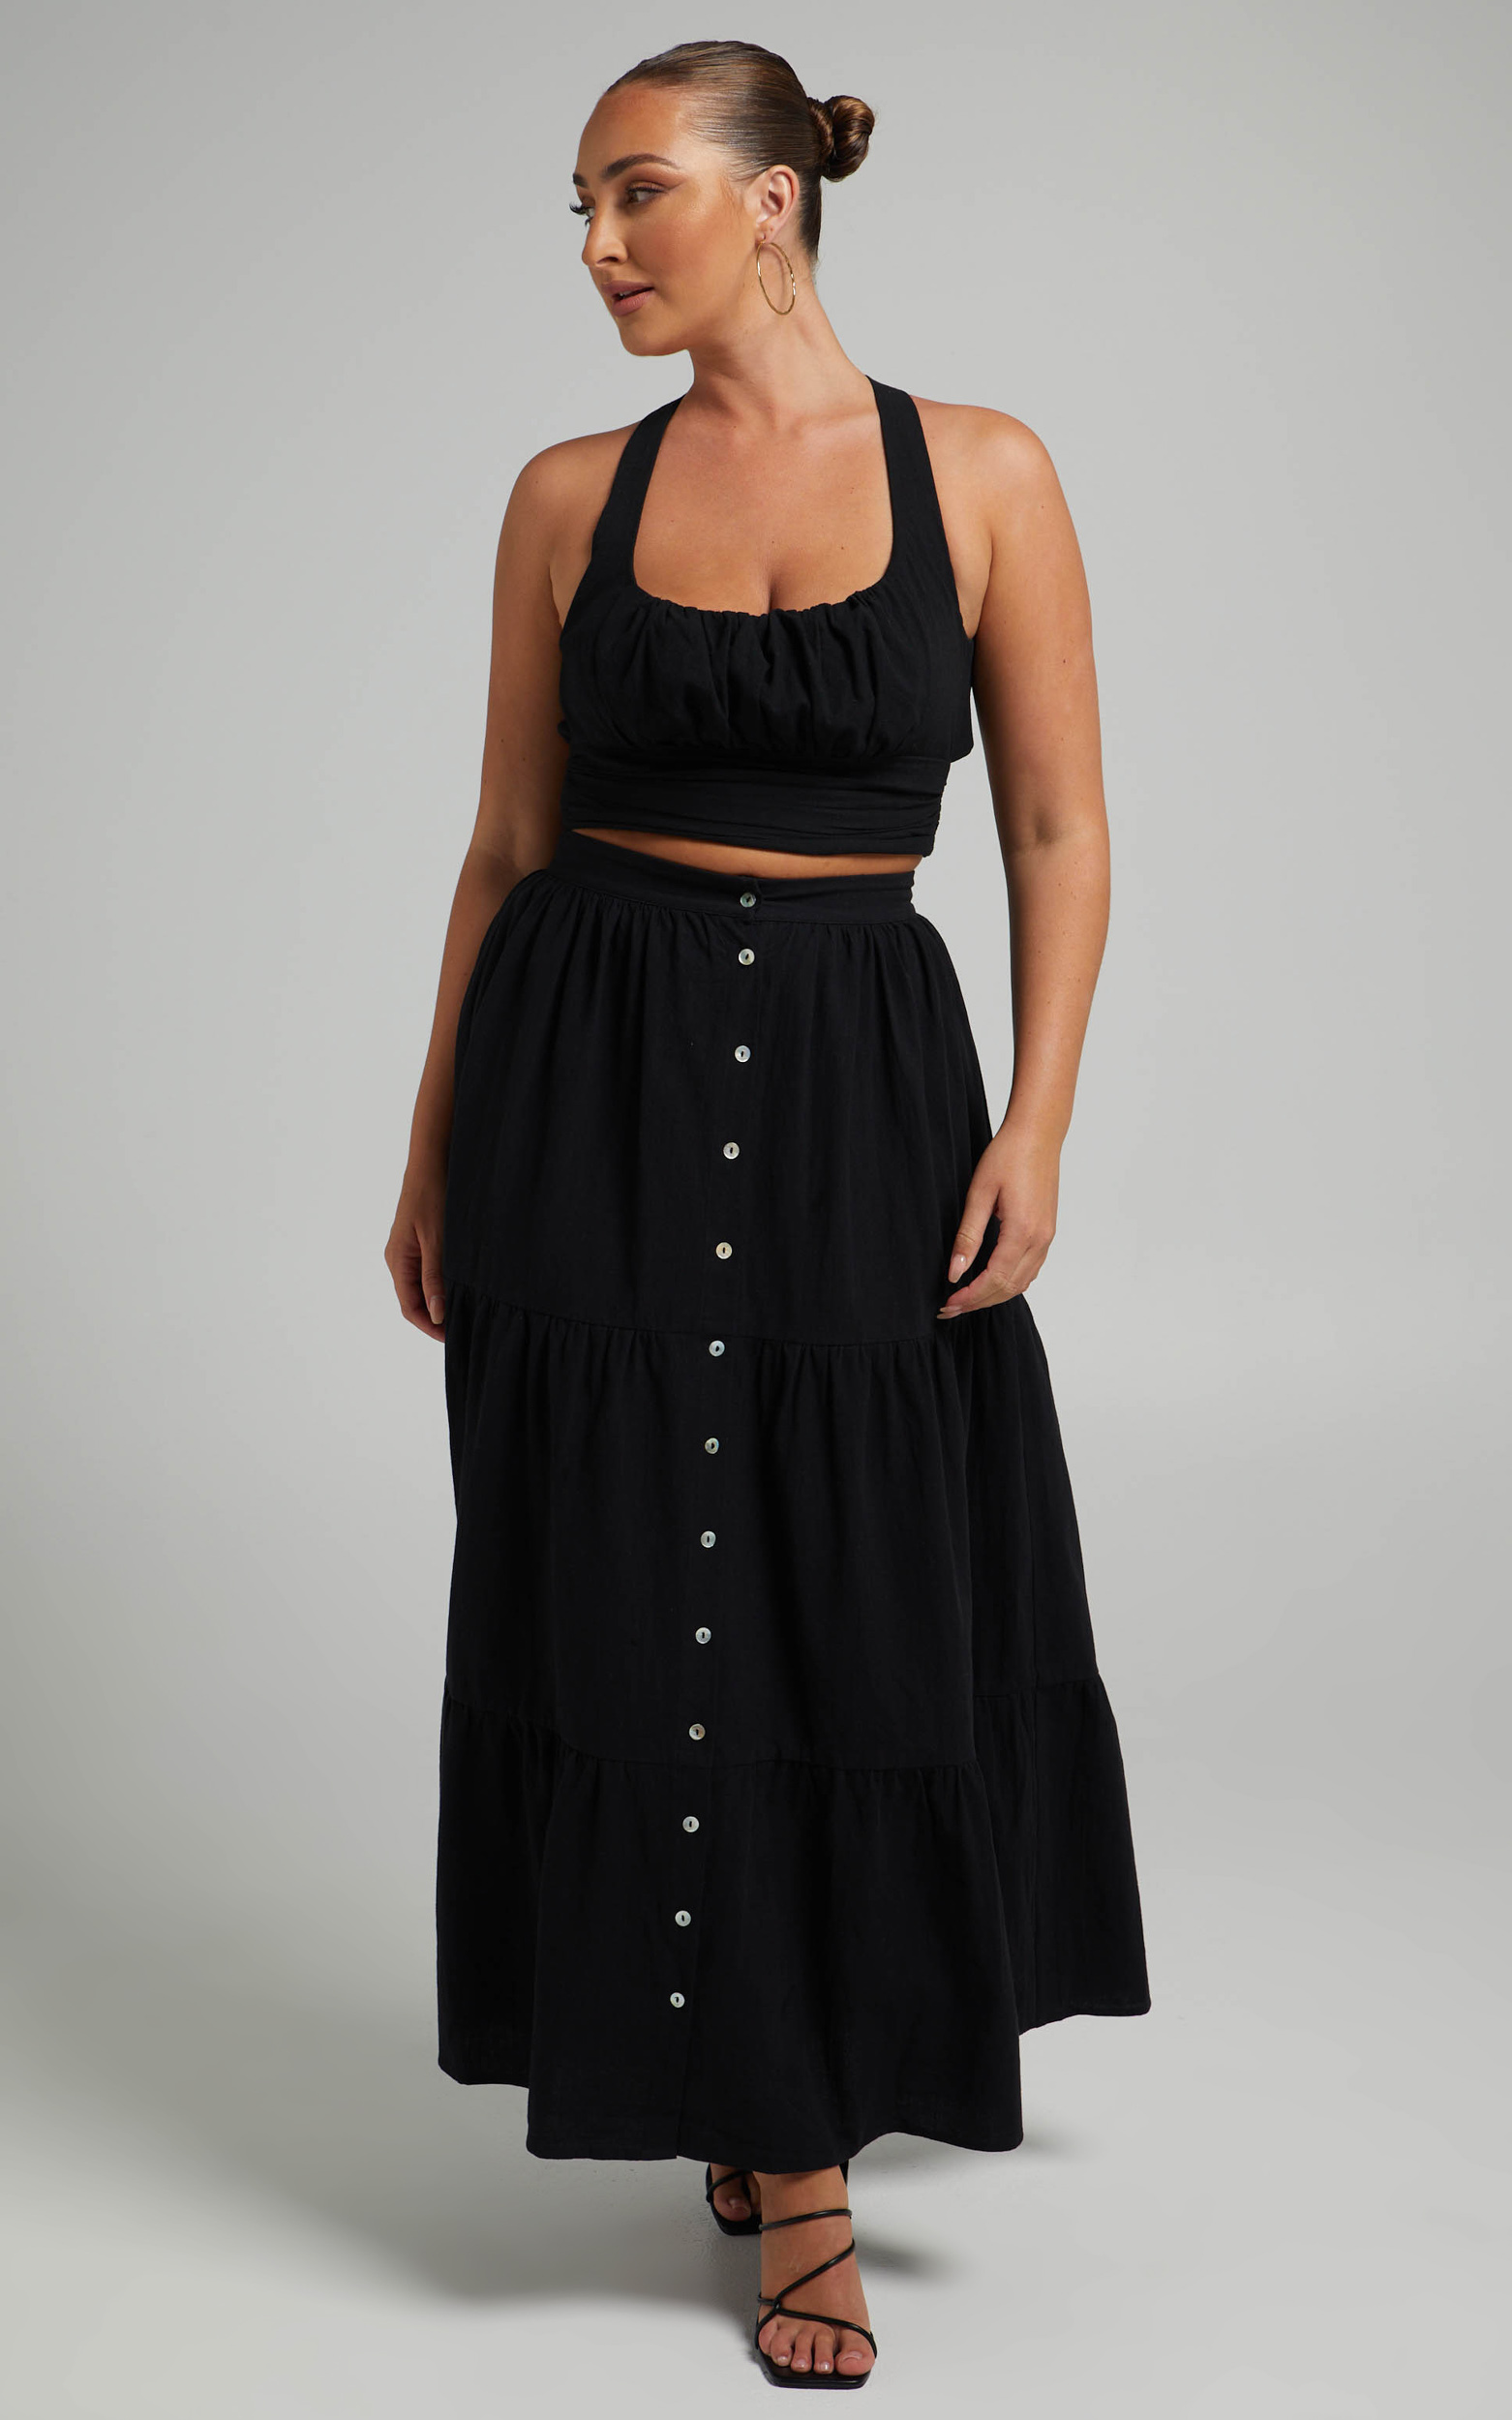 Arabella Tiered Button Front Maxi Skirt in Black - 04, BLK1, hi-res image number null